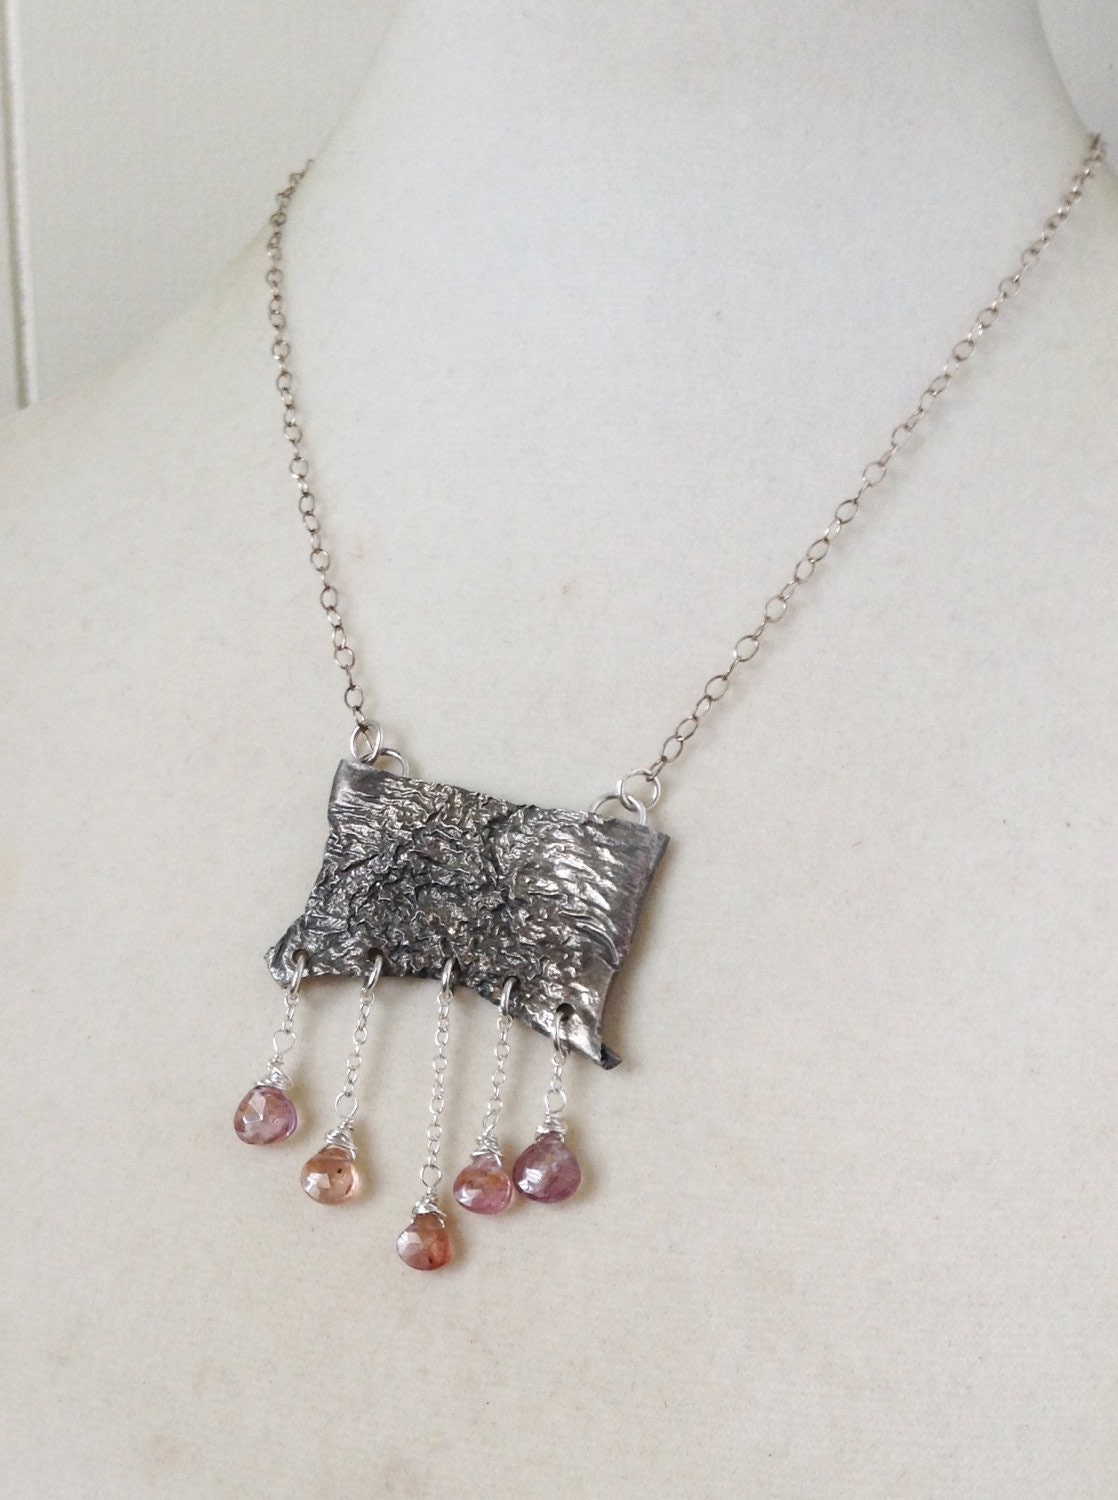 Reticulated Silver and Spinel Necklace - Etsy